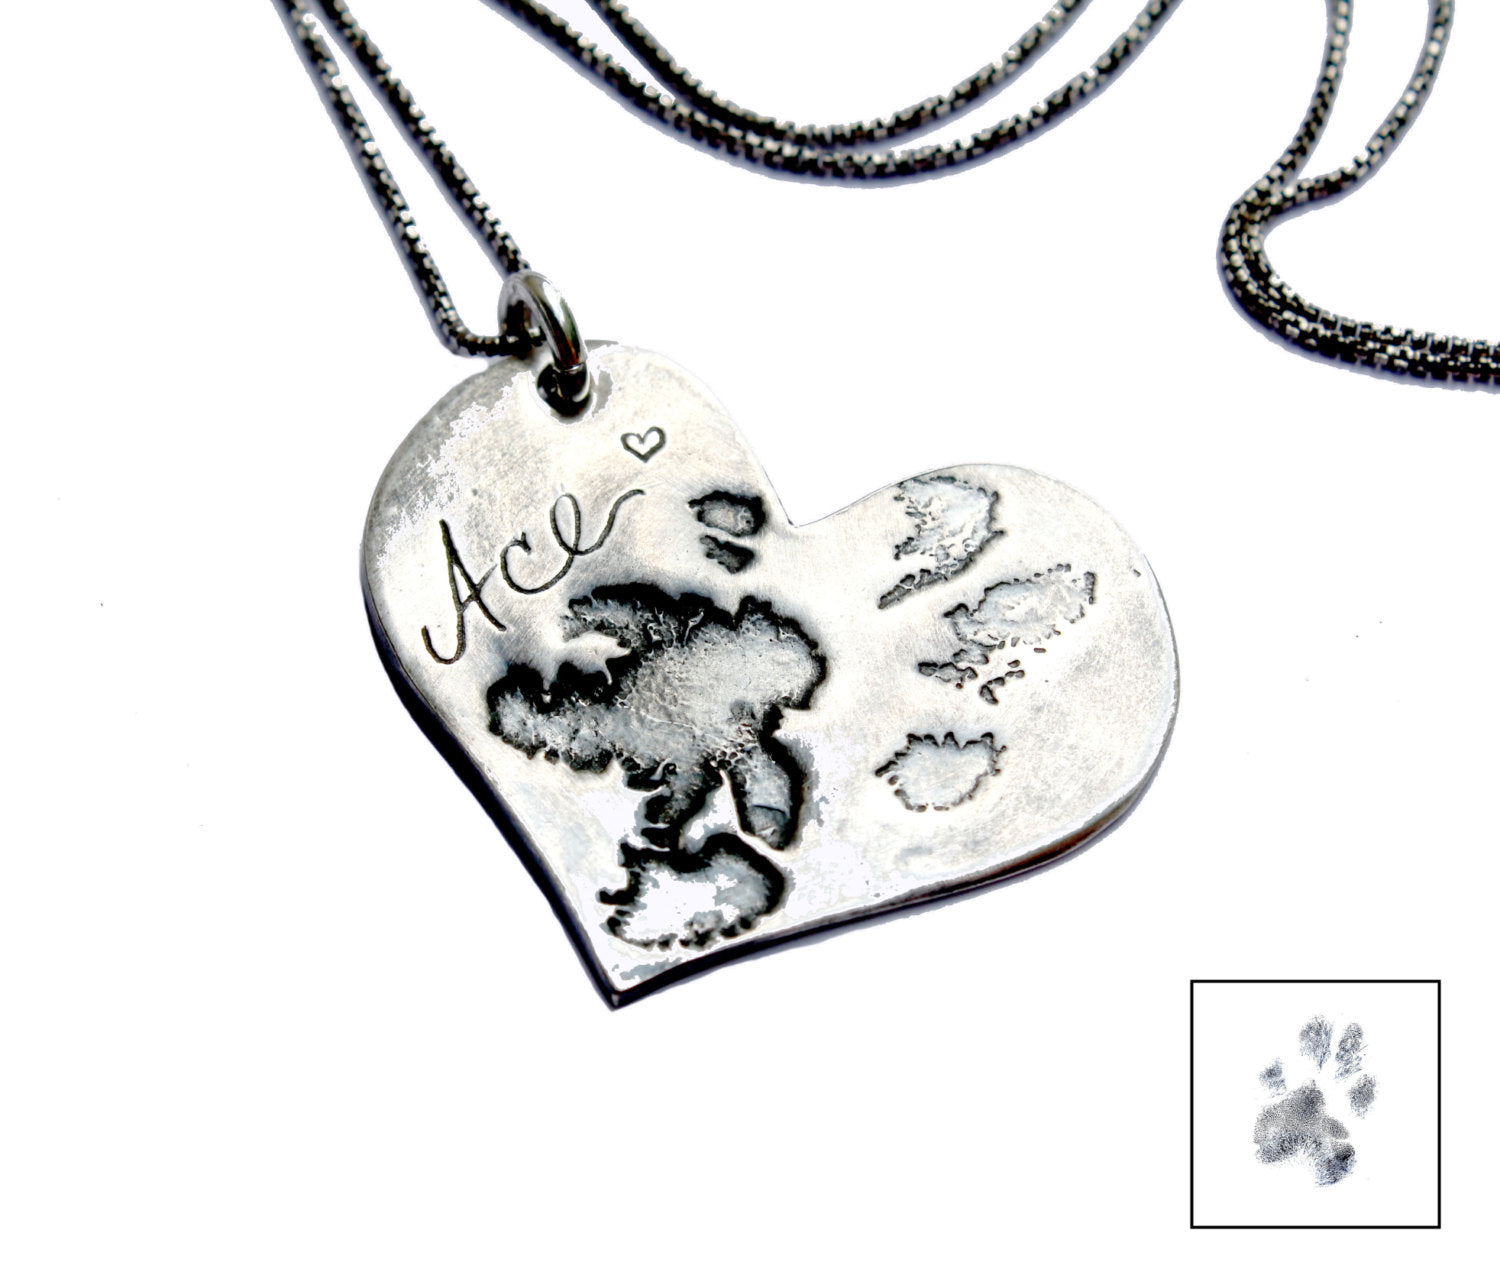 Amazon.com: Personalized Paw Print Necklace, Pet Memorial Necklace, Dog or  Cat Memorial Jewelry 16mm, Dog lover gift, CHristmas gift for cat mom :  Handmade Products